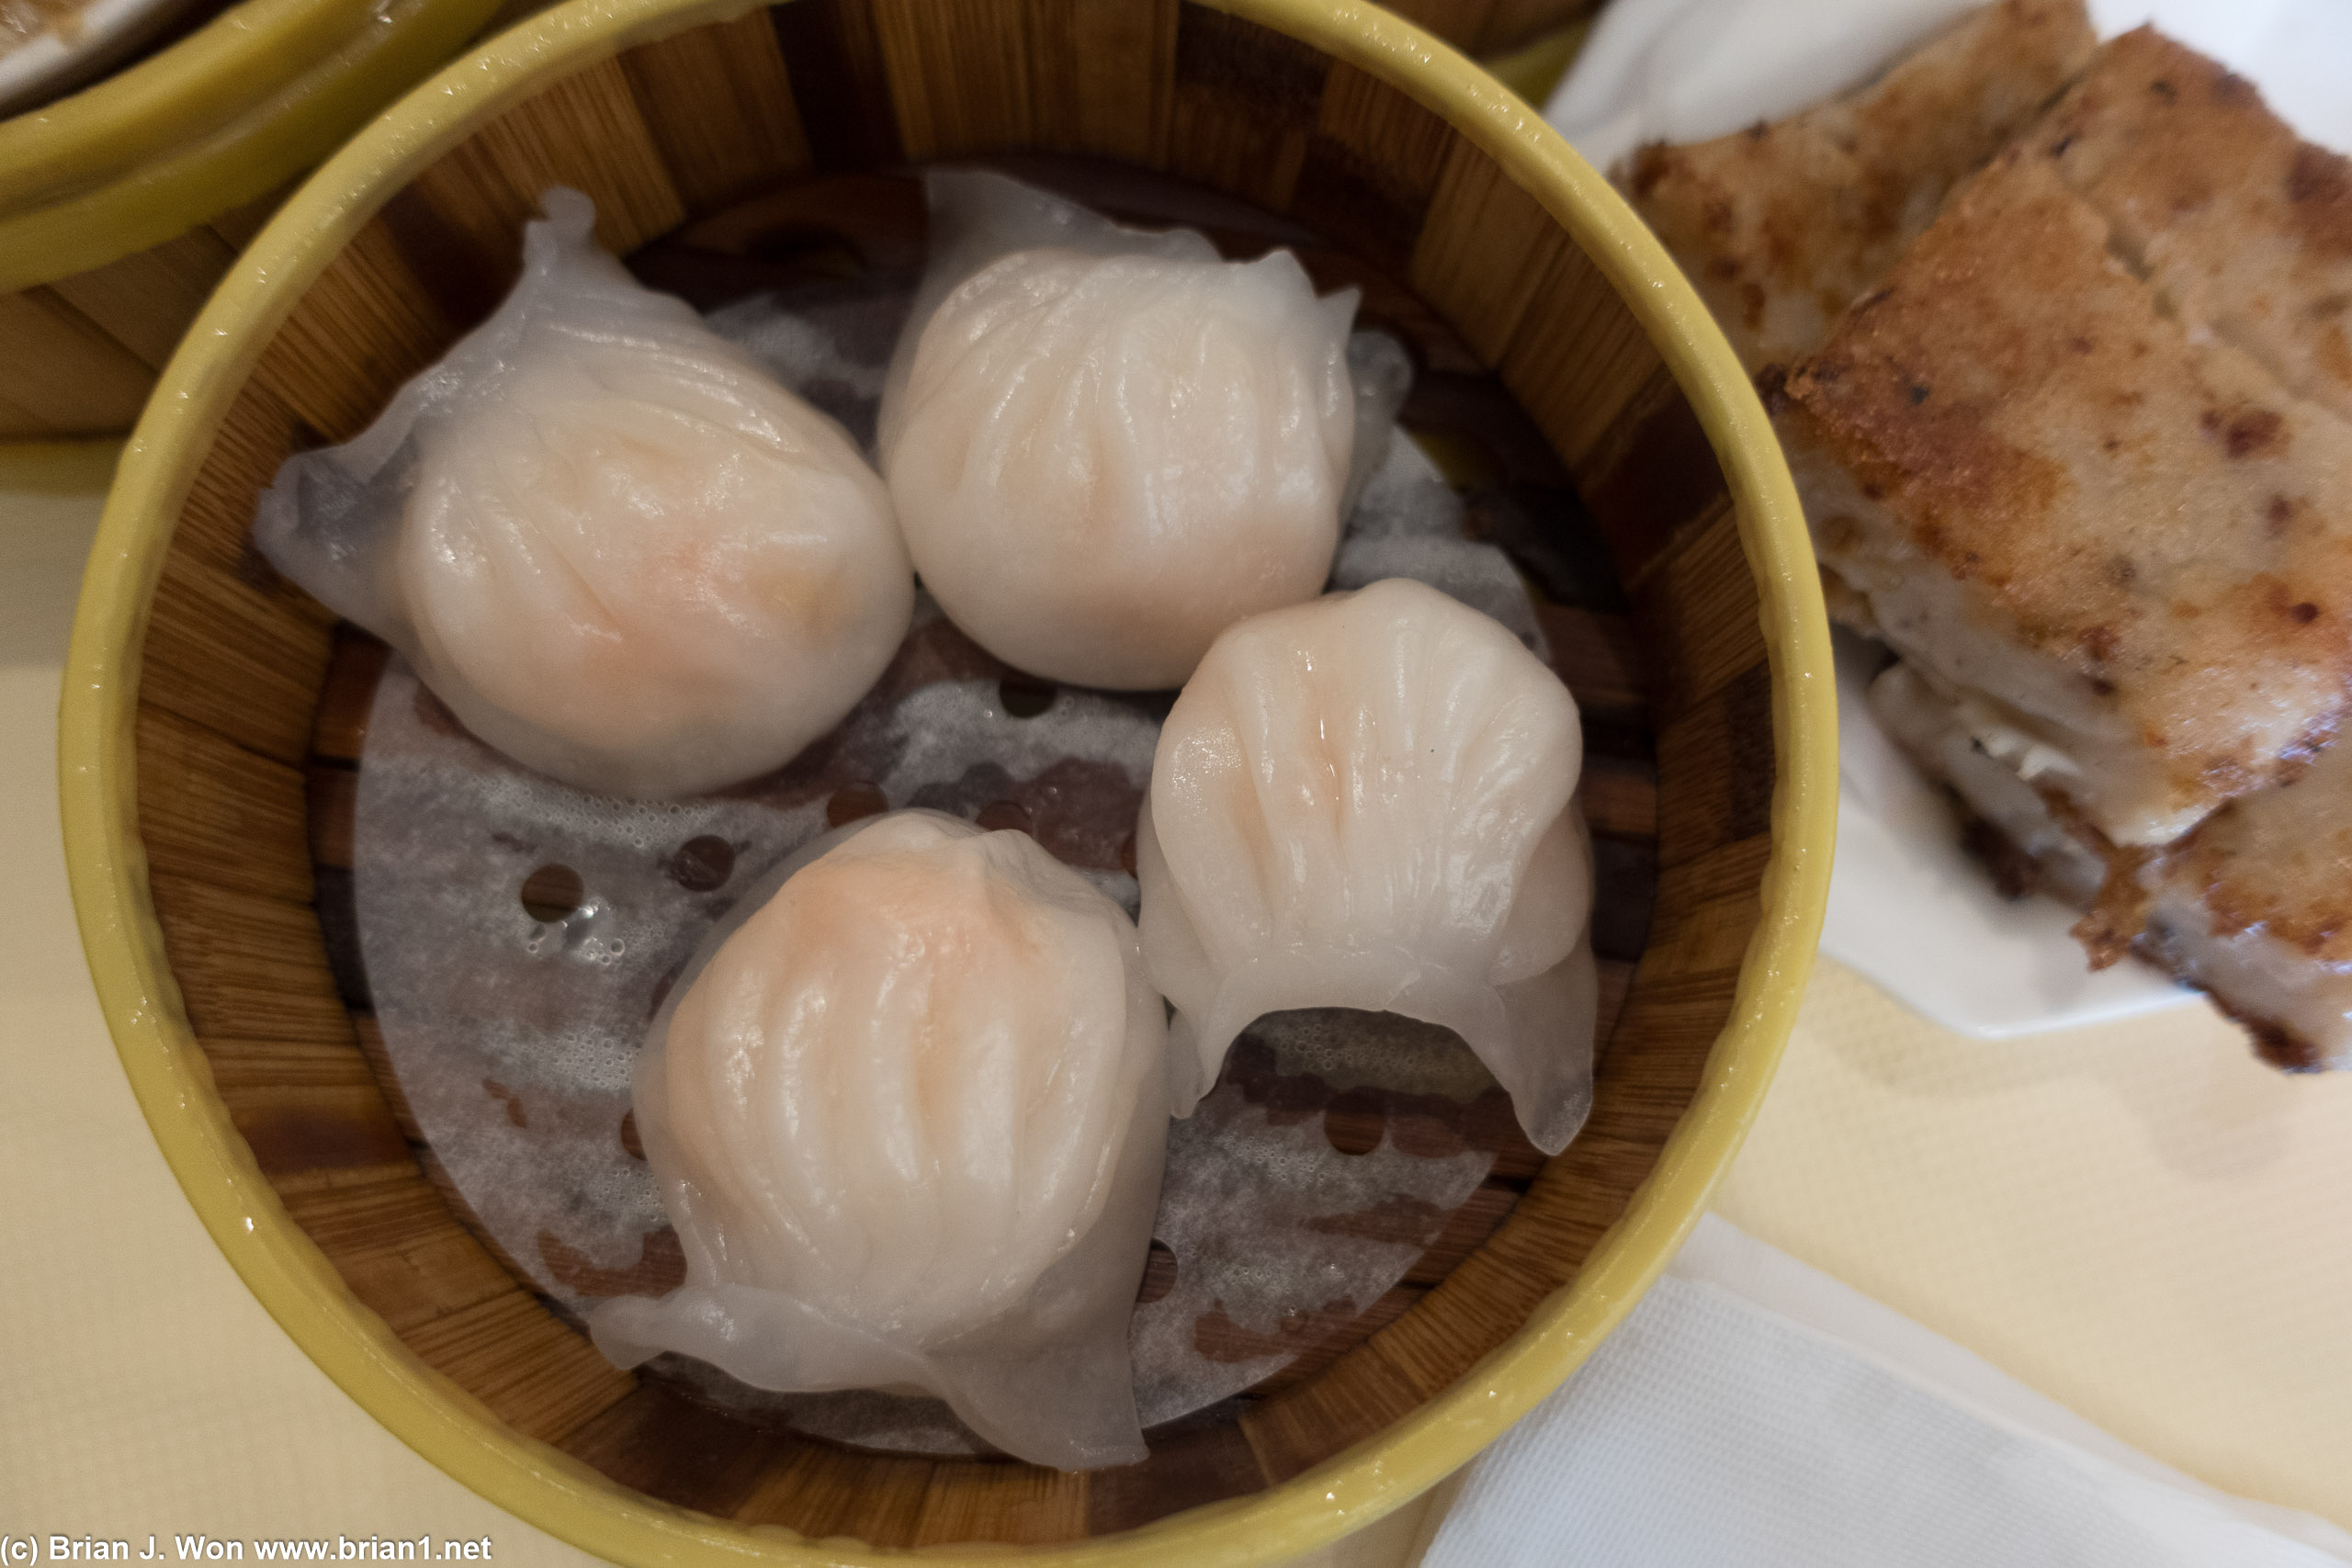 Har gow were short on folds and skin was not quite there, but they had potential.